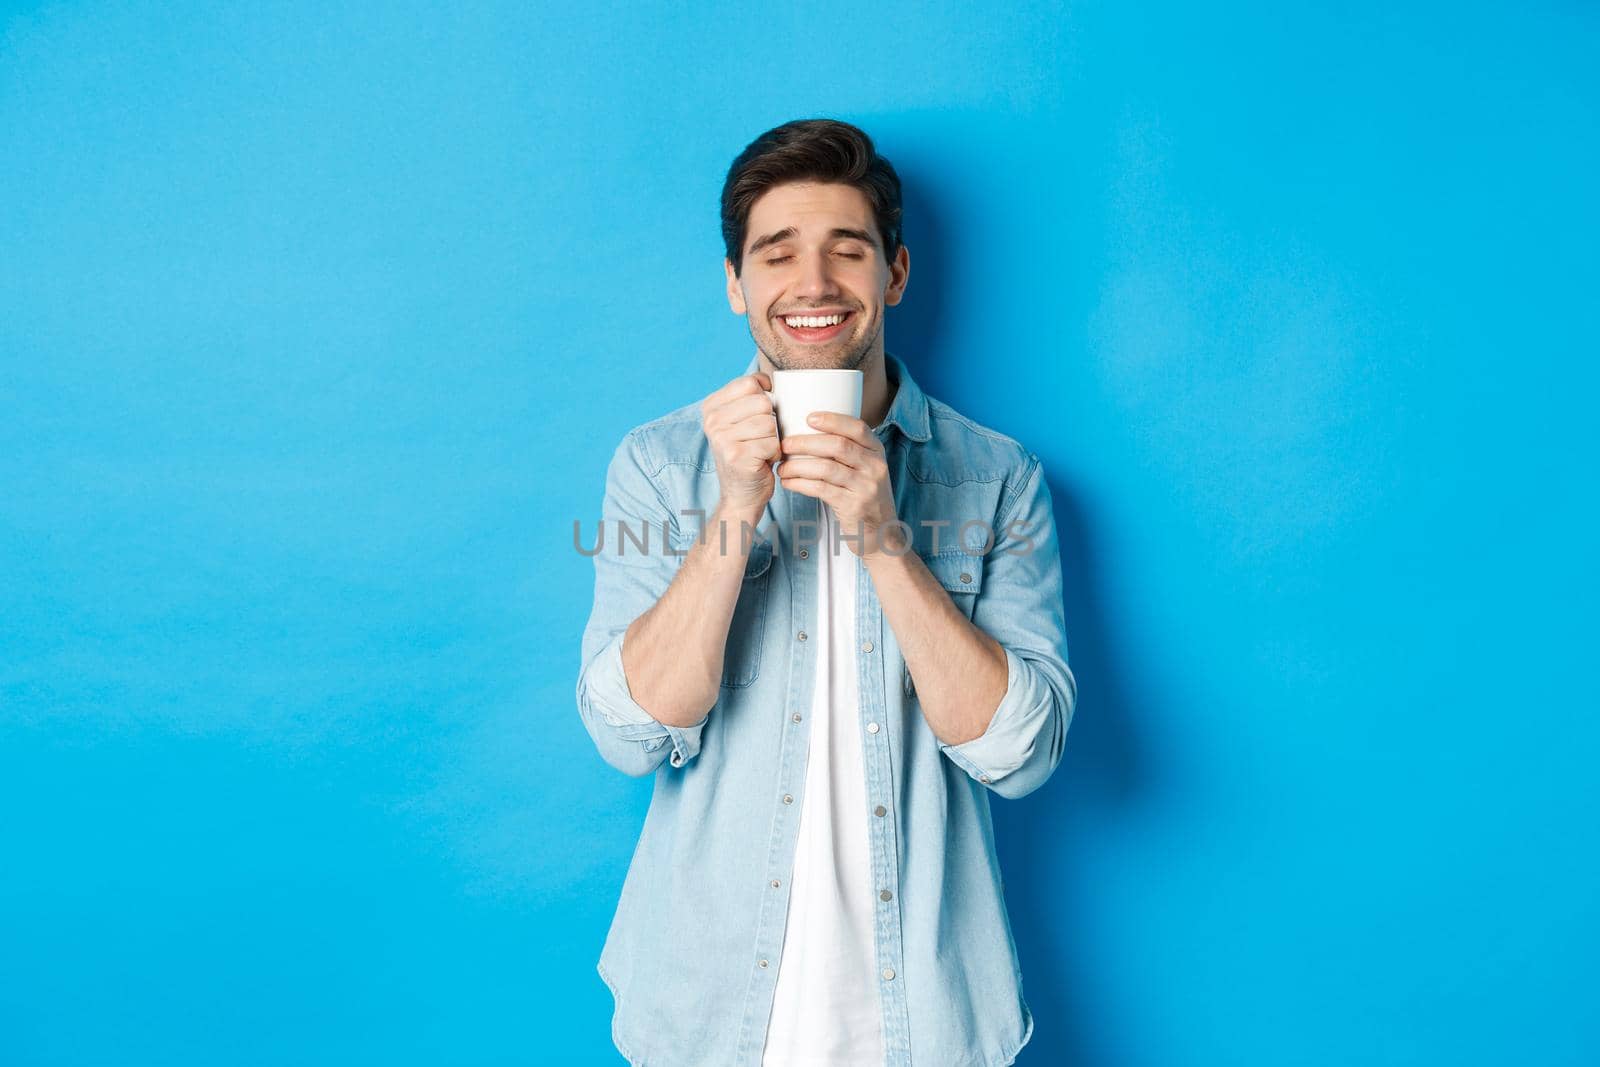 Satisfied man enjoying cup of tea or coffee, holding mug with pleased smile, standing against blue background.